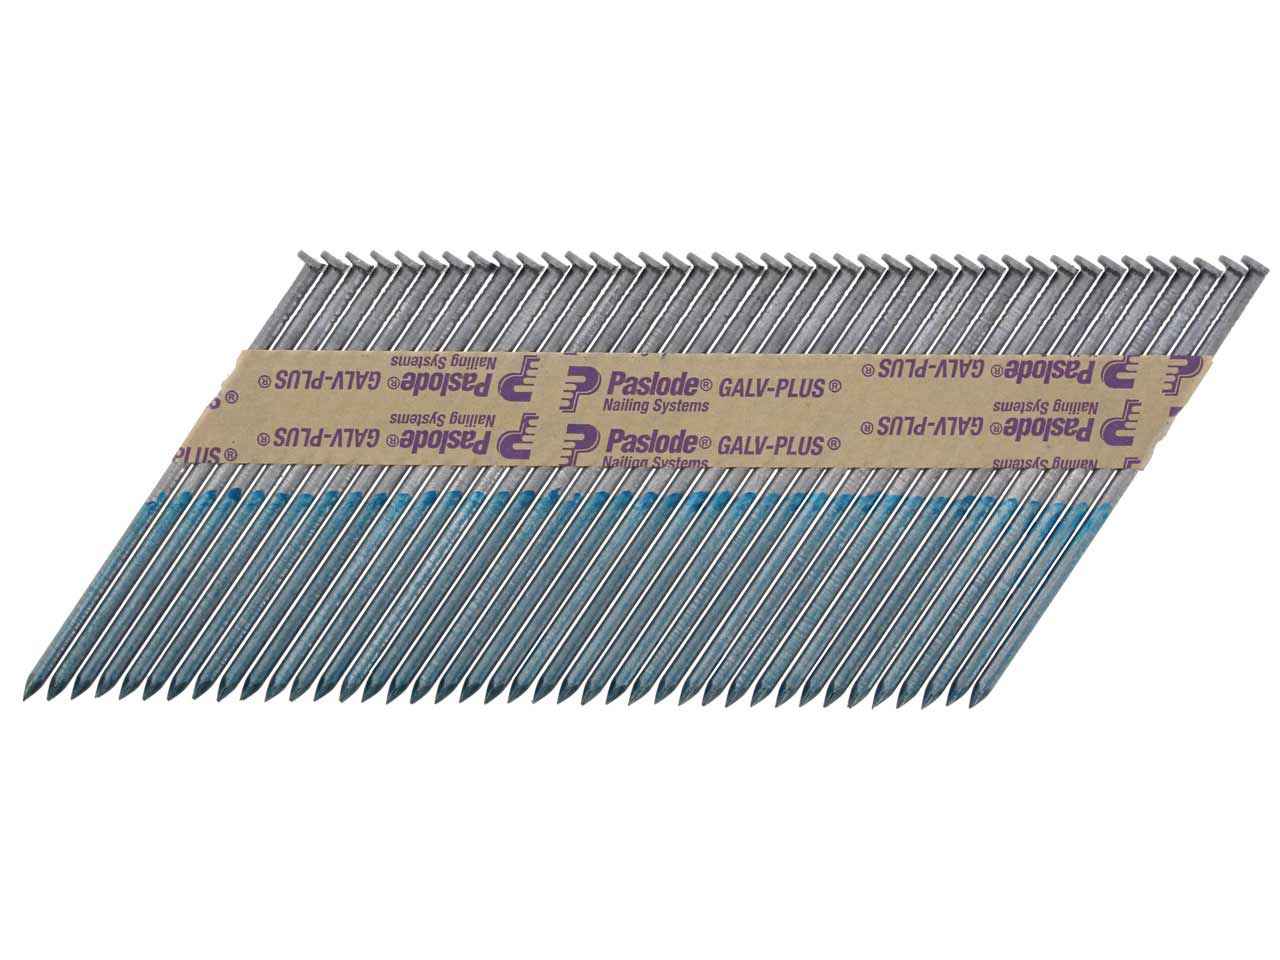 NEW** Paslode 141267 3.1mm x 90mm Smooth Pack of 1100 Nails + 1 Fuel Cell |  eBay